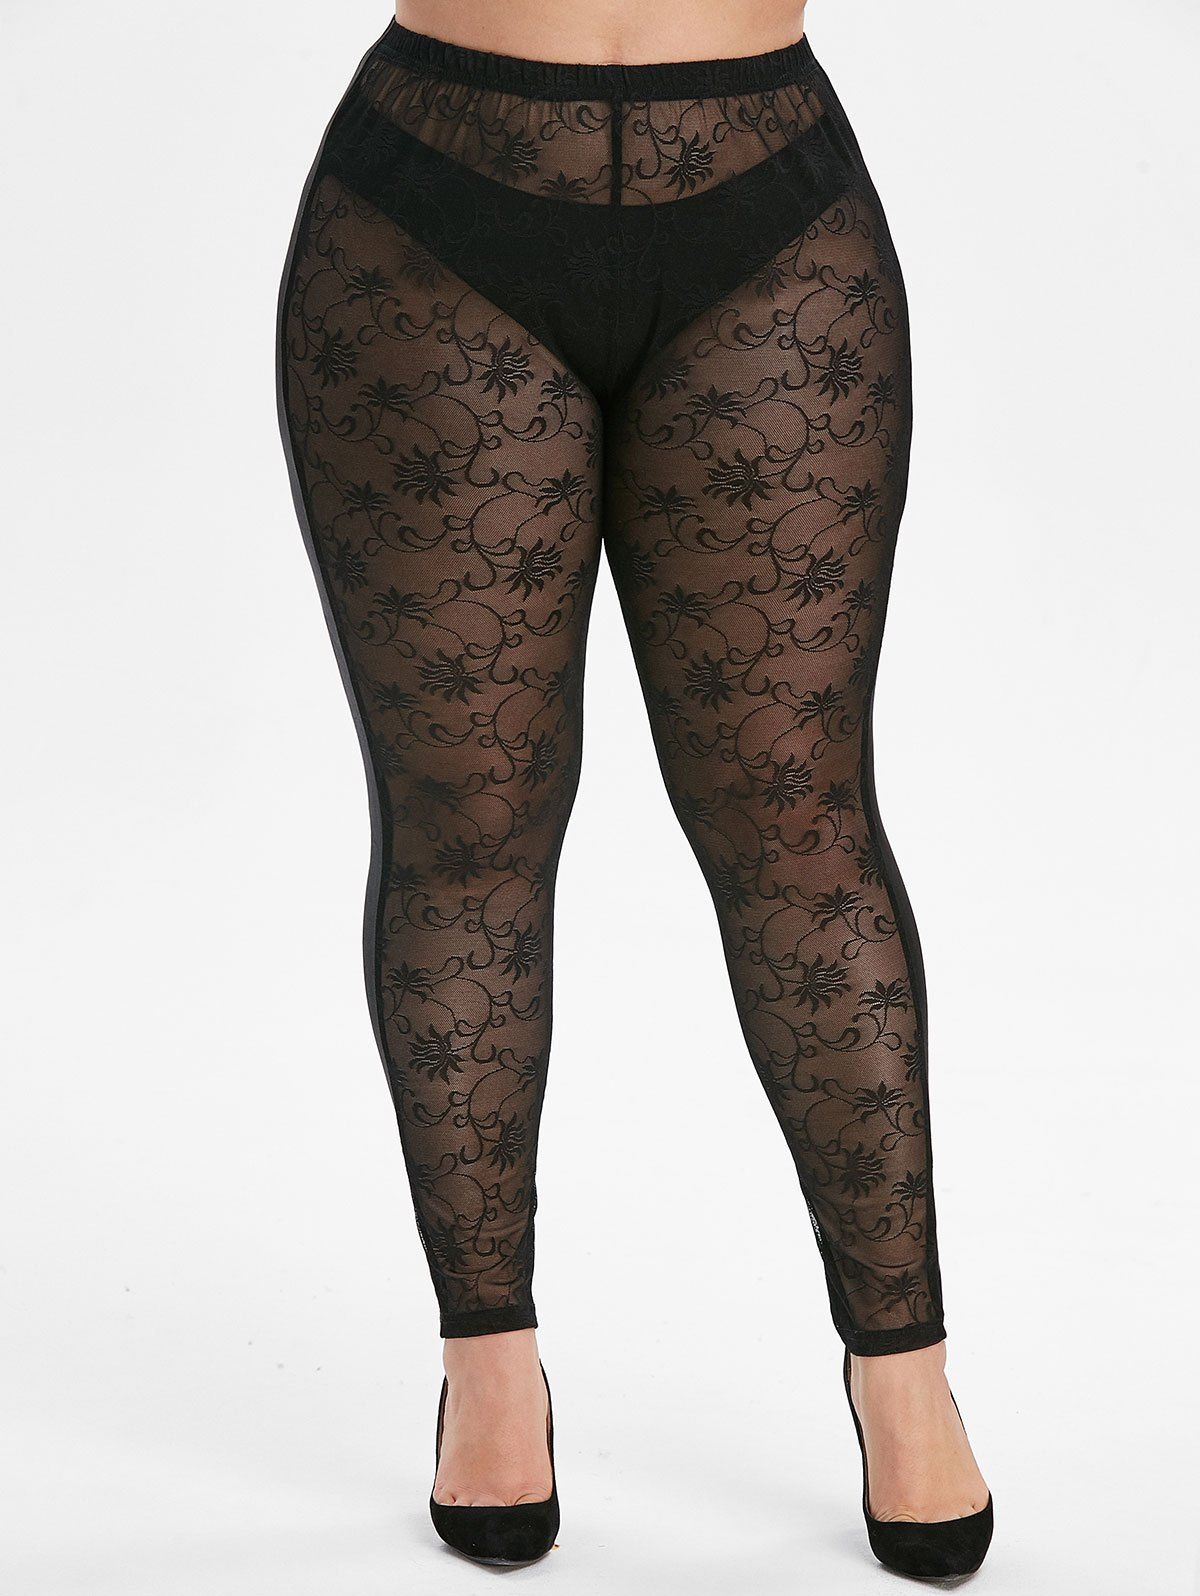 Lace See Through Leggings For Sales Tax